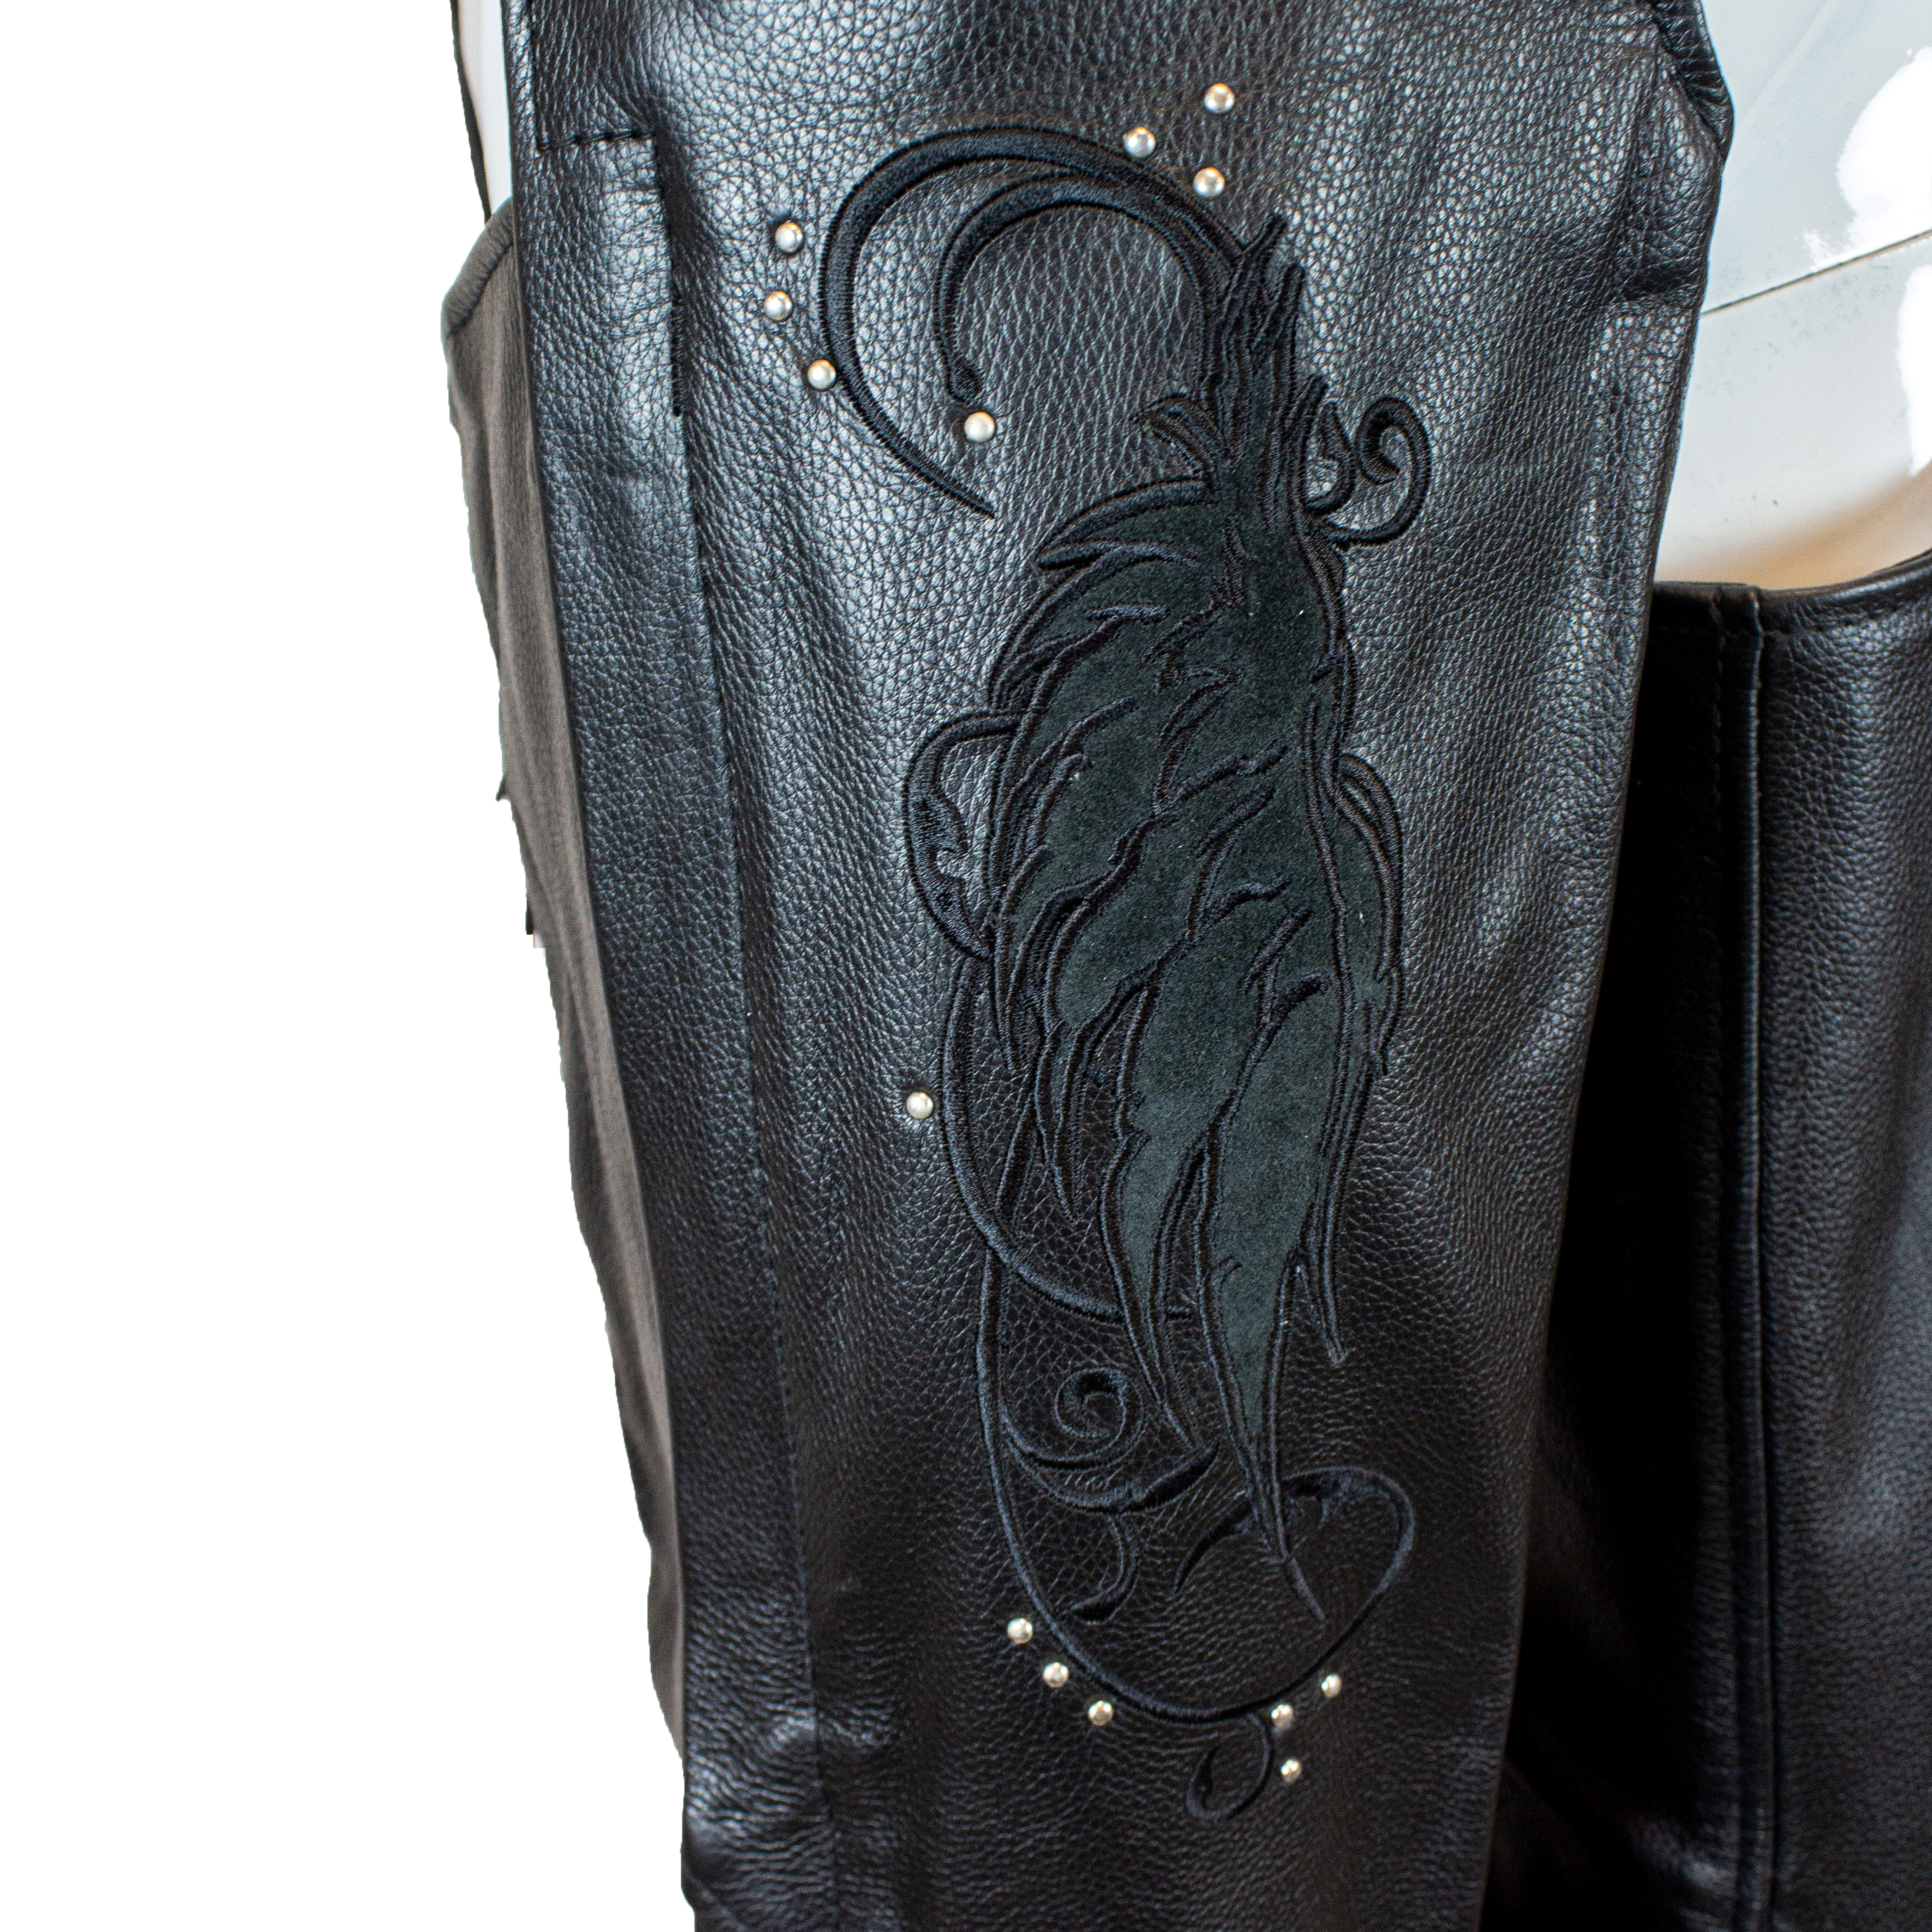 BOL/Open Road Women's Suede Wing Design Leather Chaps